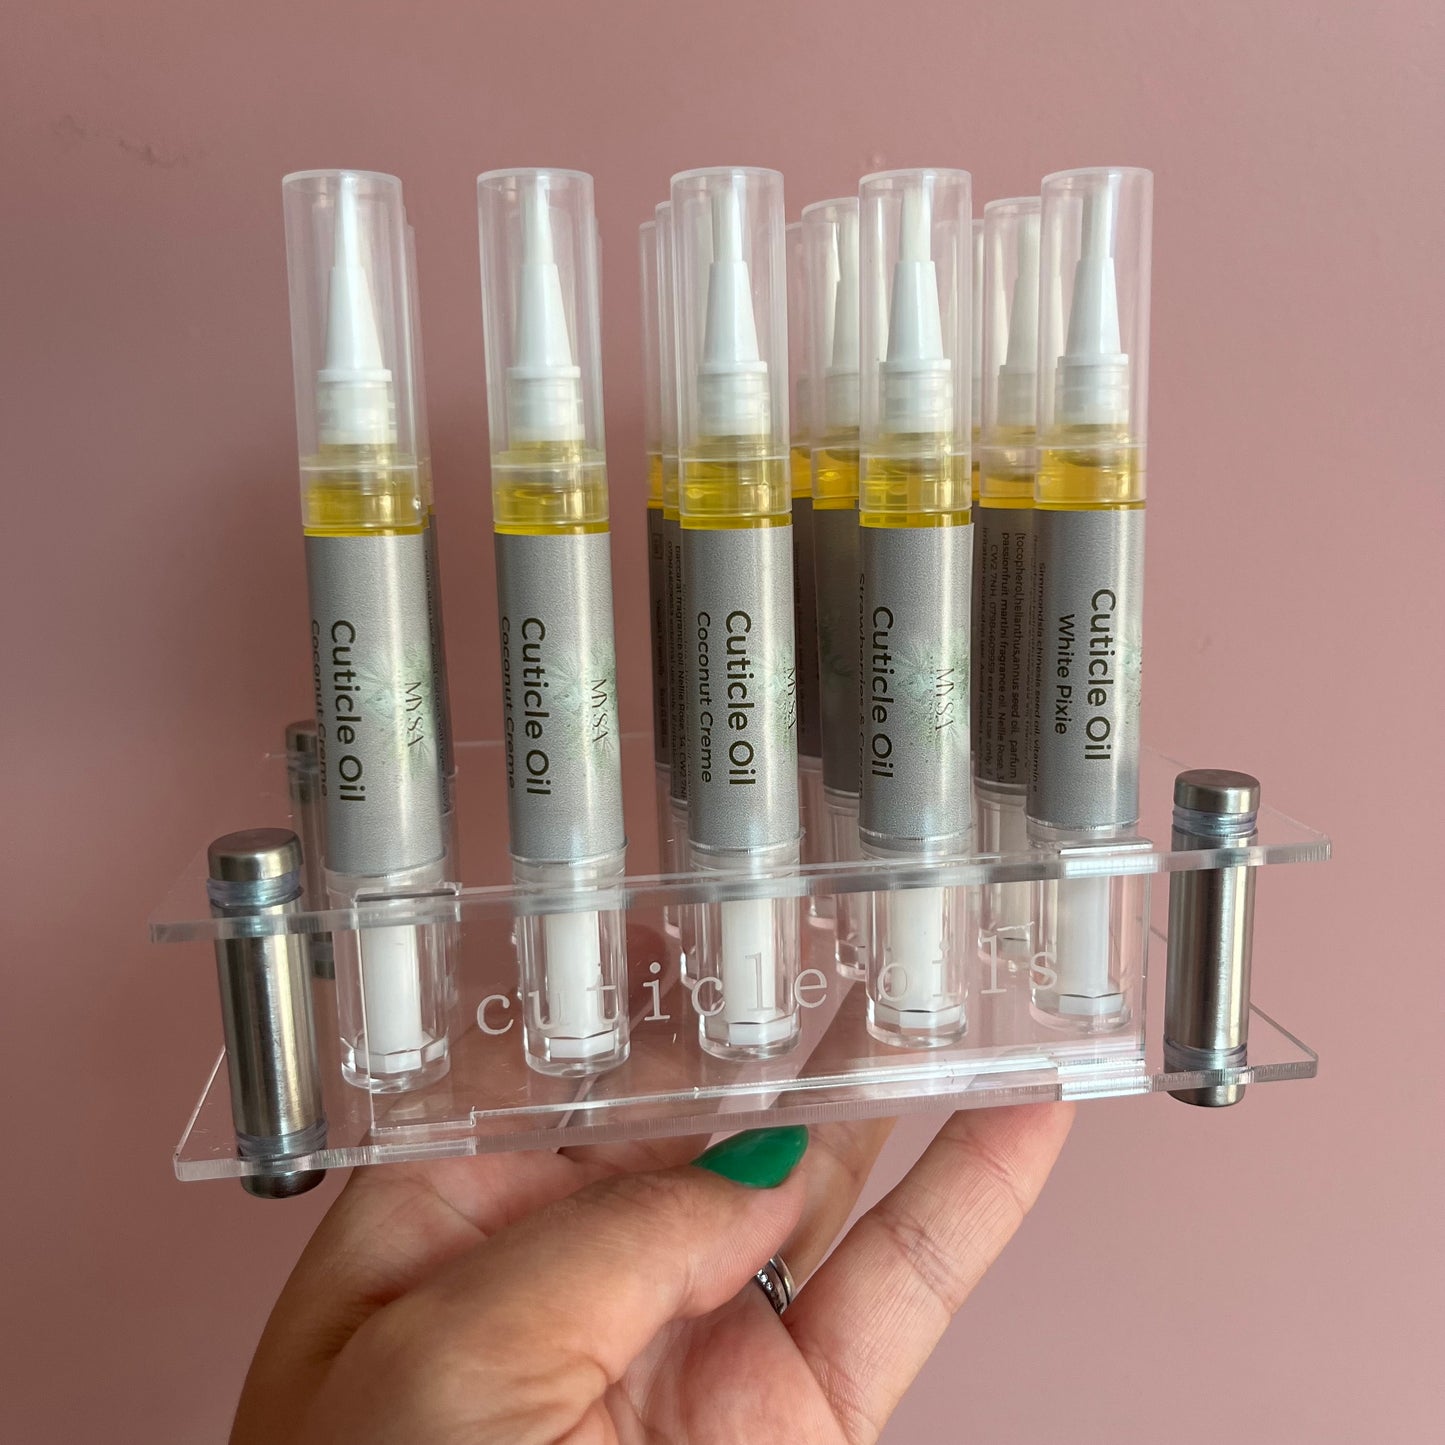 Generic Cuticle Oil Pen Stand Only (no pens included.